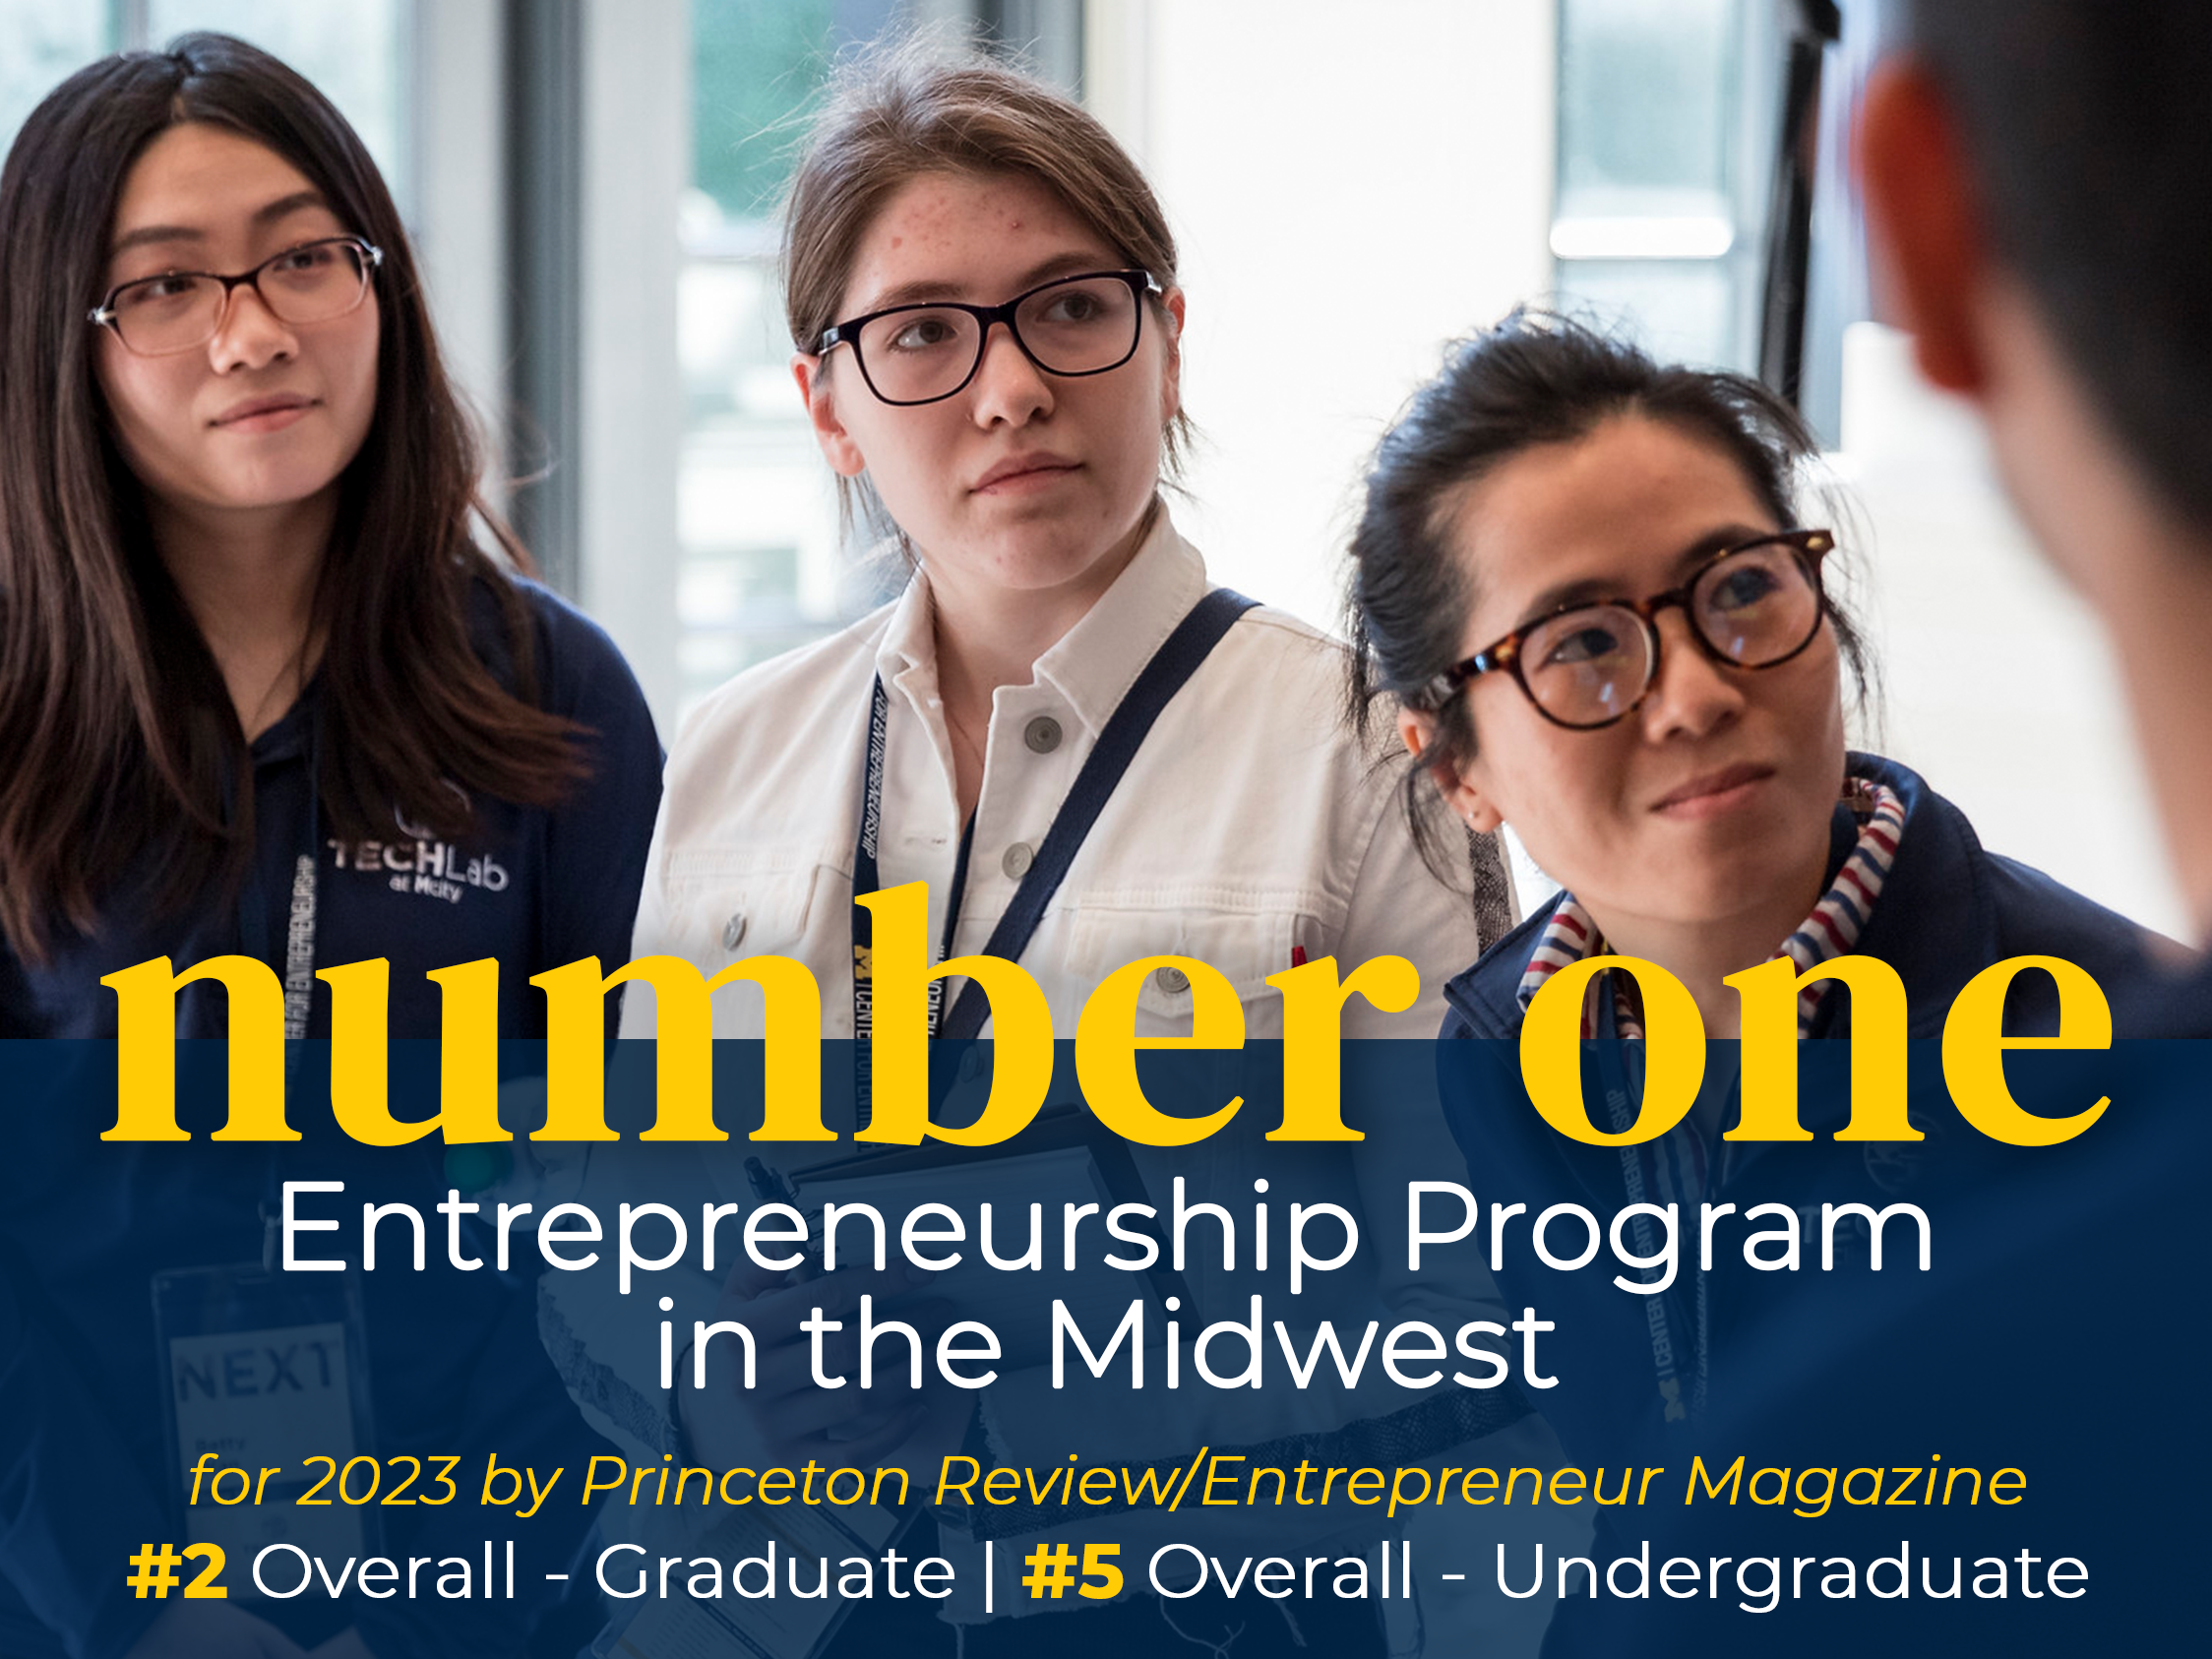 University of Michigan ranked Number One Entrepreneurship Program in the Midwest for 2023 by Princeton Review/Entrepreneur Magazine, Number 2 overall for graduate, and number 5 overall for undergraduate